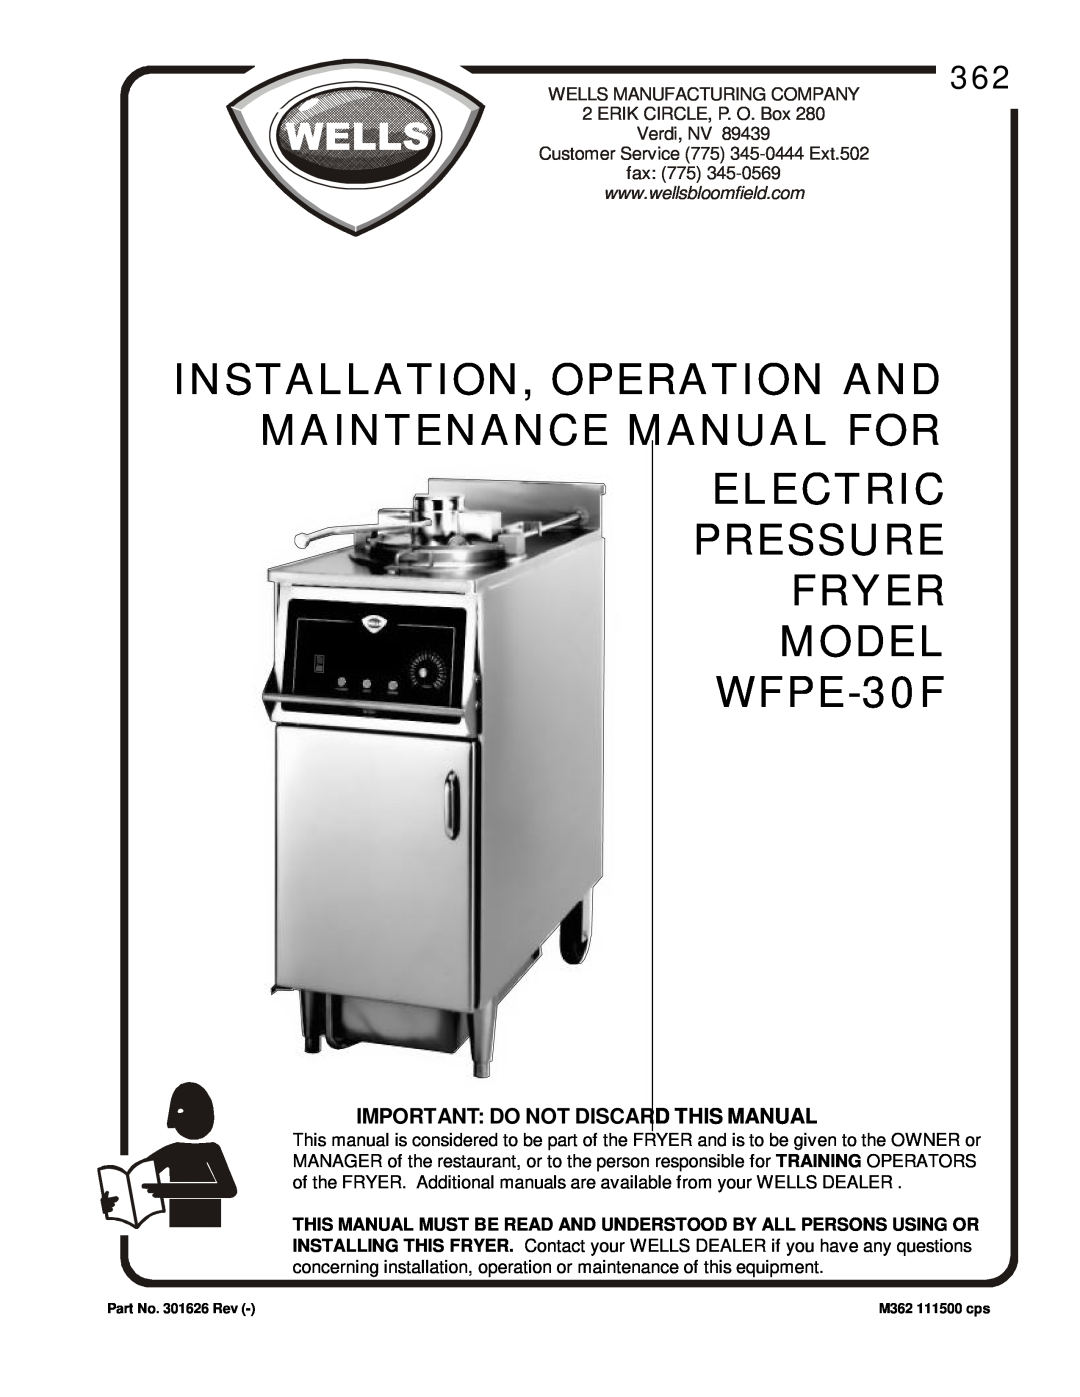 Bloomfield manual Important Do Not Discard This Manual, ELECTRIC PRESSURE FRYER MODEL WFPE-30F 